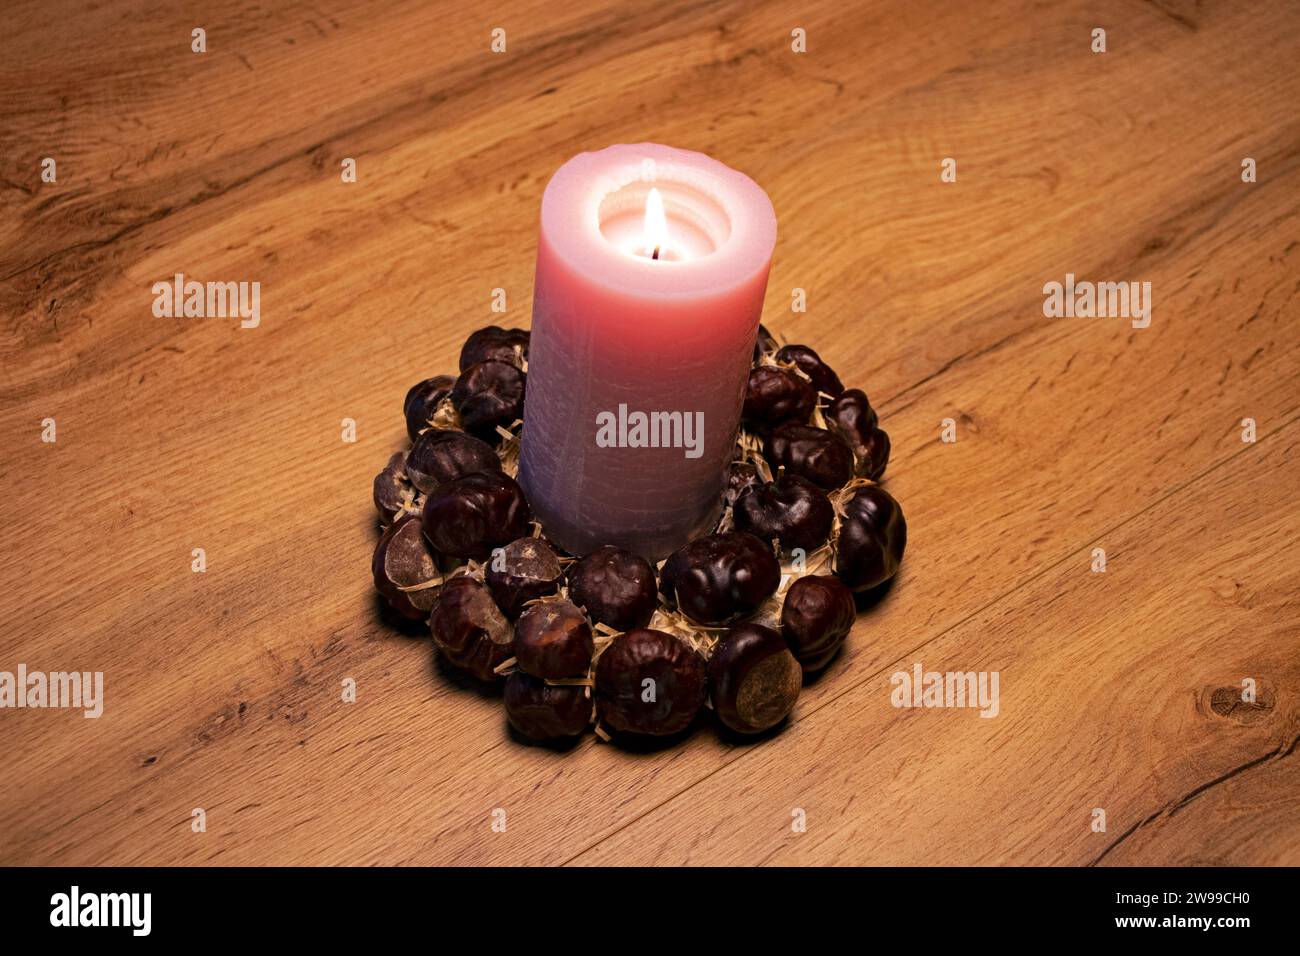 The decorative pinky candle with flame on chestnut ring on close-up christmas scene Stock Photo